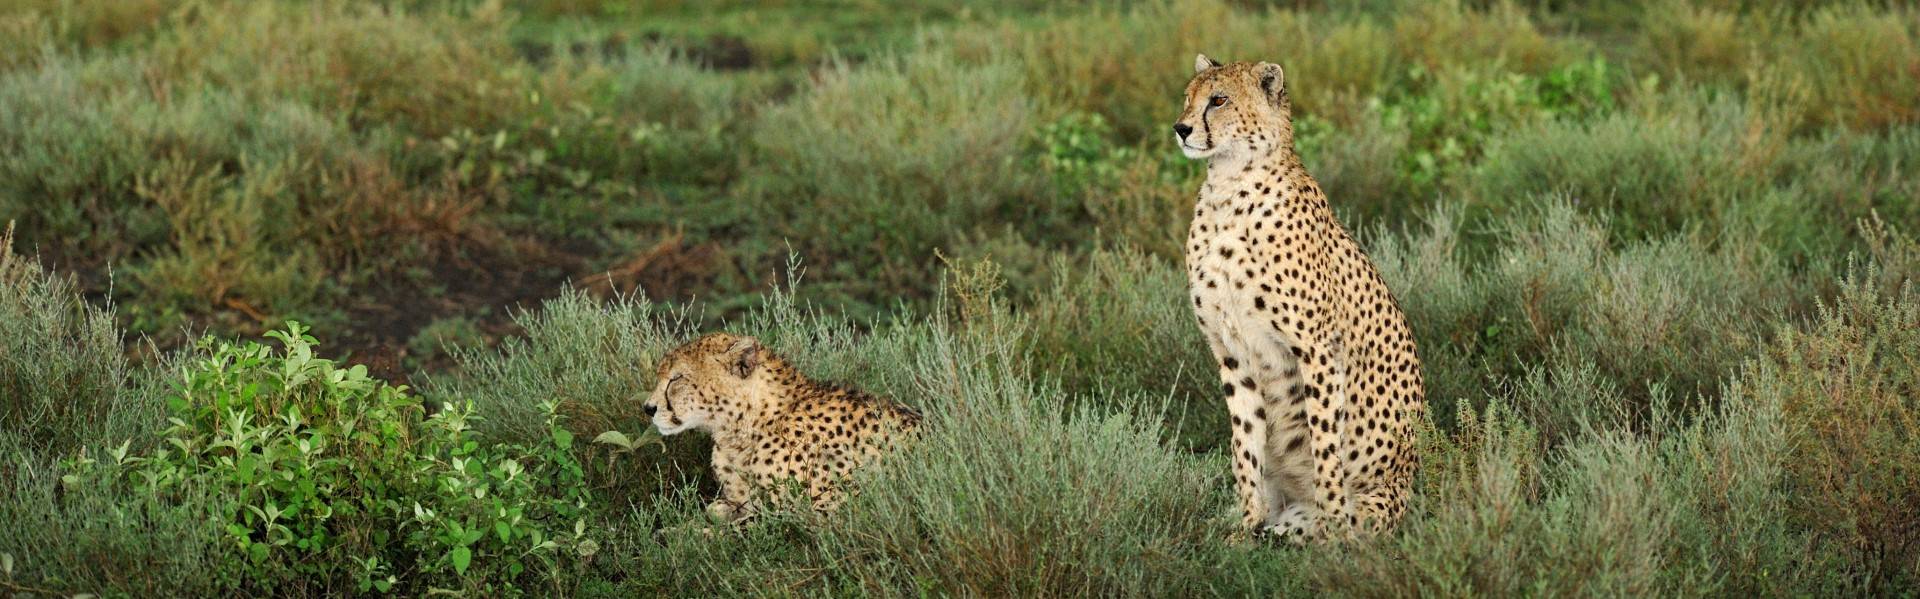 The Call of the Cheetah